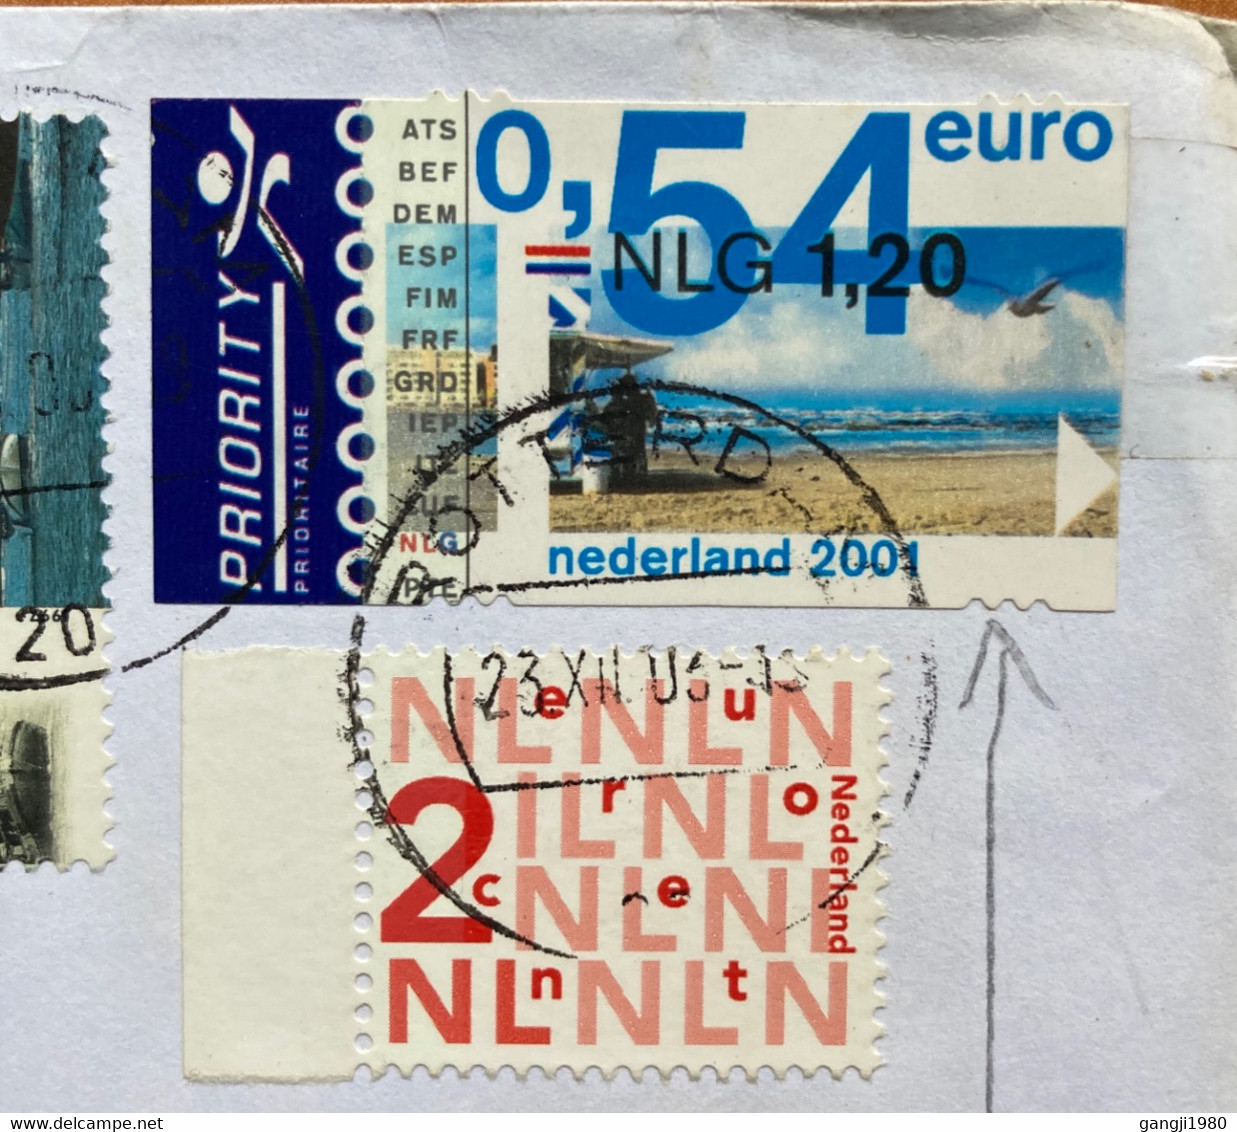 NEDERLAND 2004, PRIORITY SELF-ADHESIVE ATM STAMP ,5 VIEW OF SEA & CITY SHIP COVER TO LITHUANIA - Brieven En Documenten